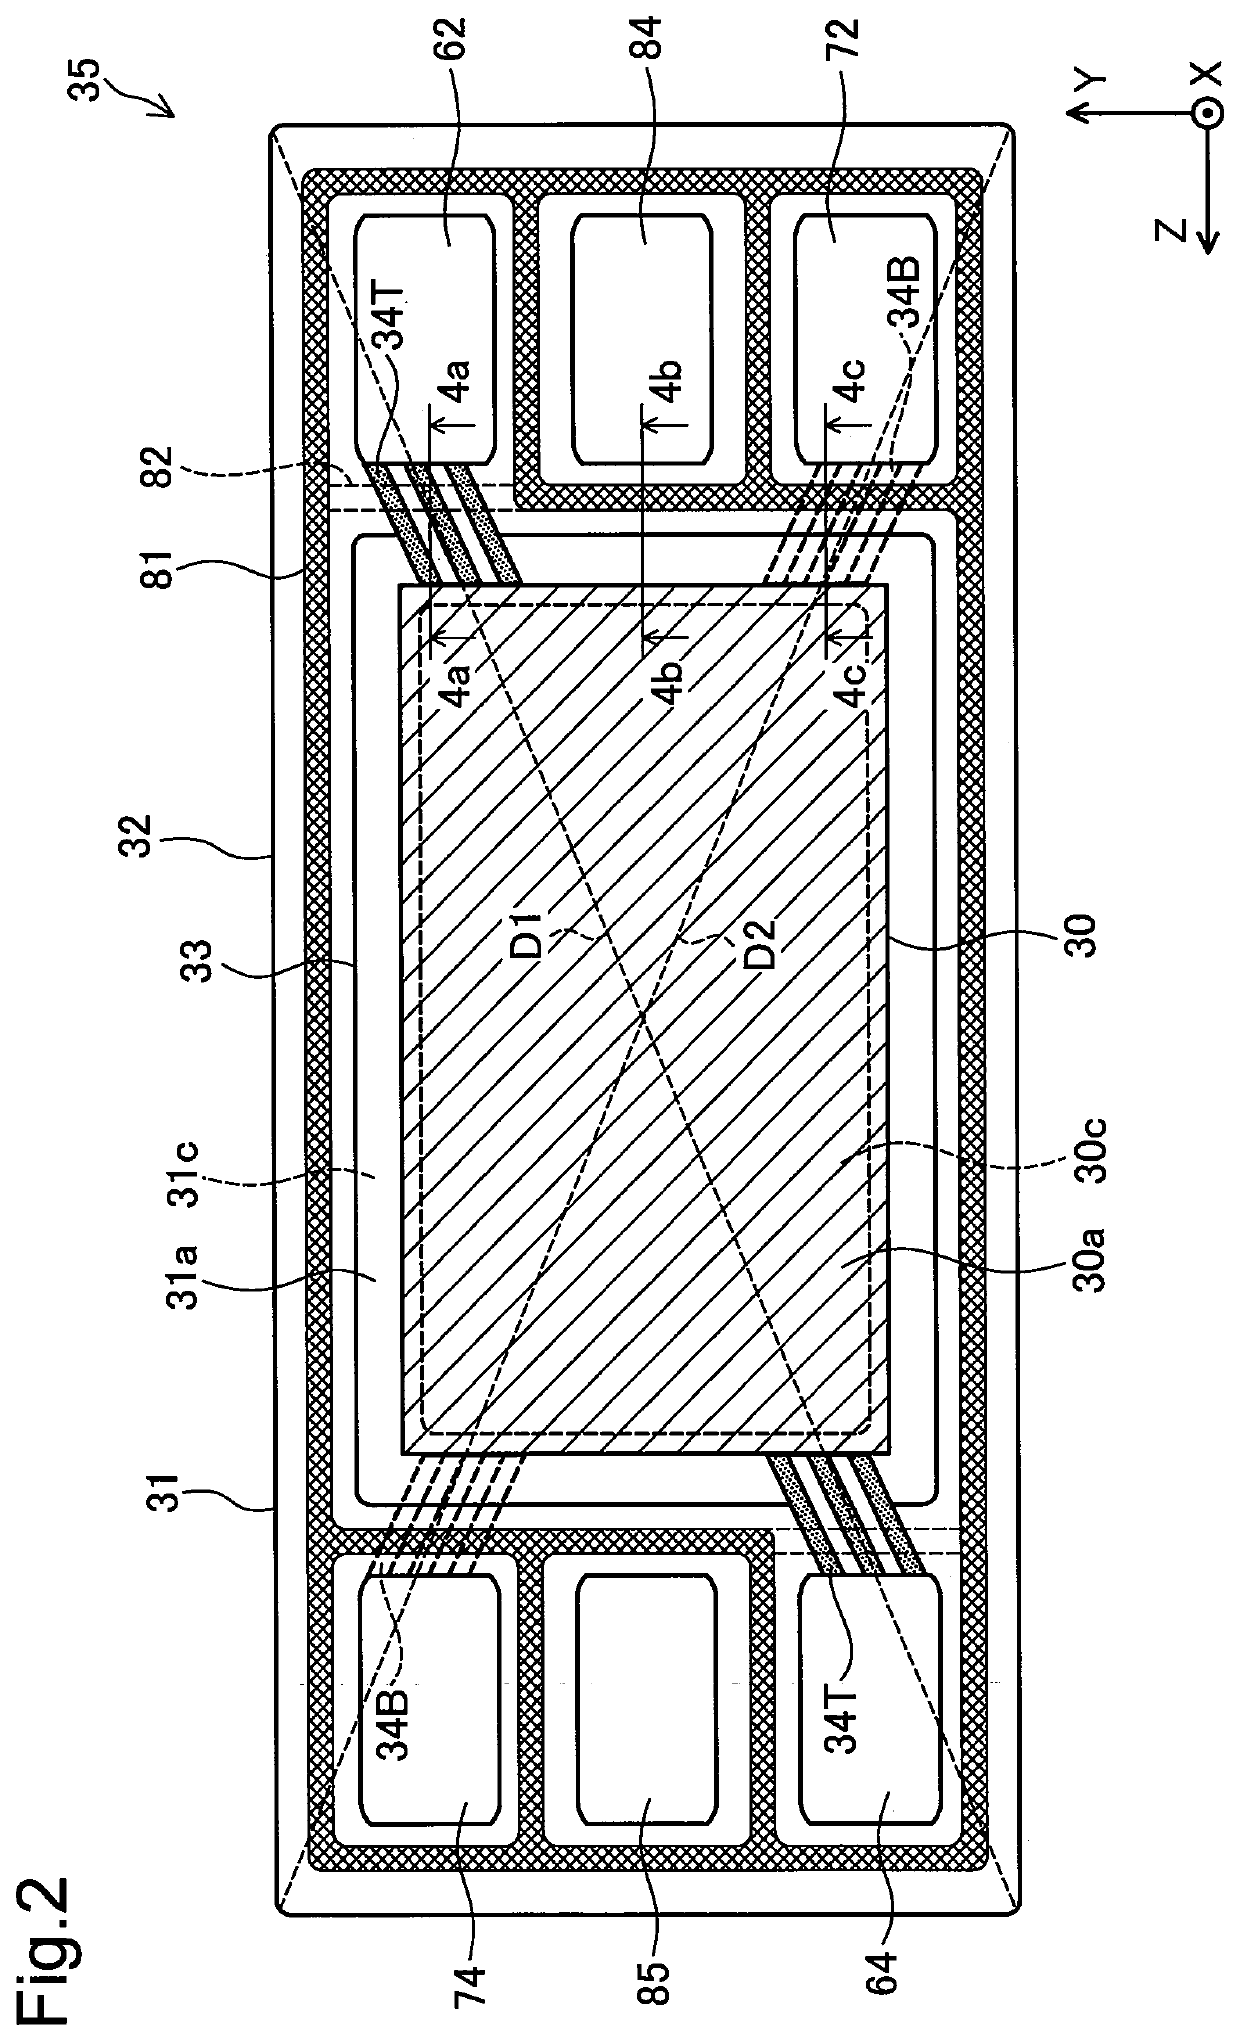 Fuel-cell unit cell and manufacturing method therefor